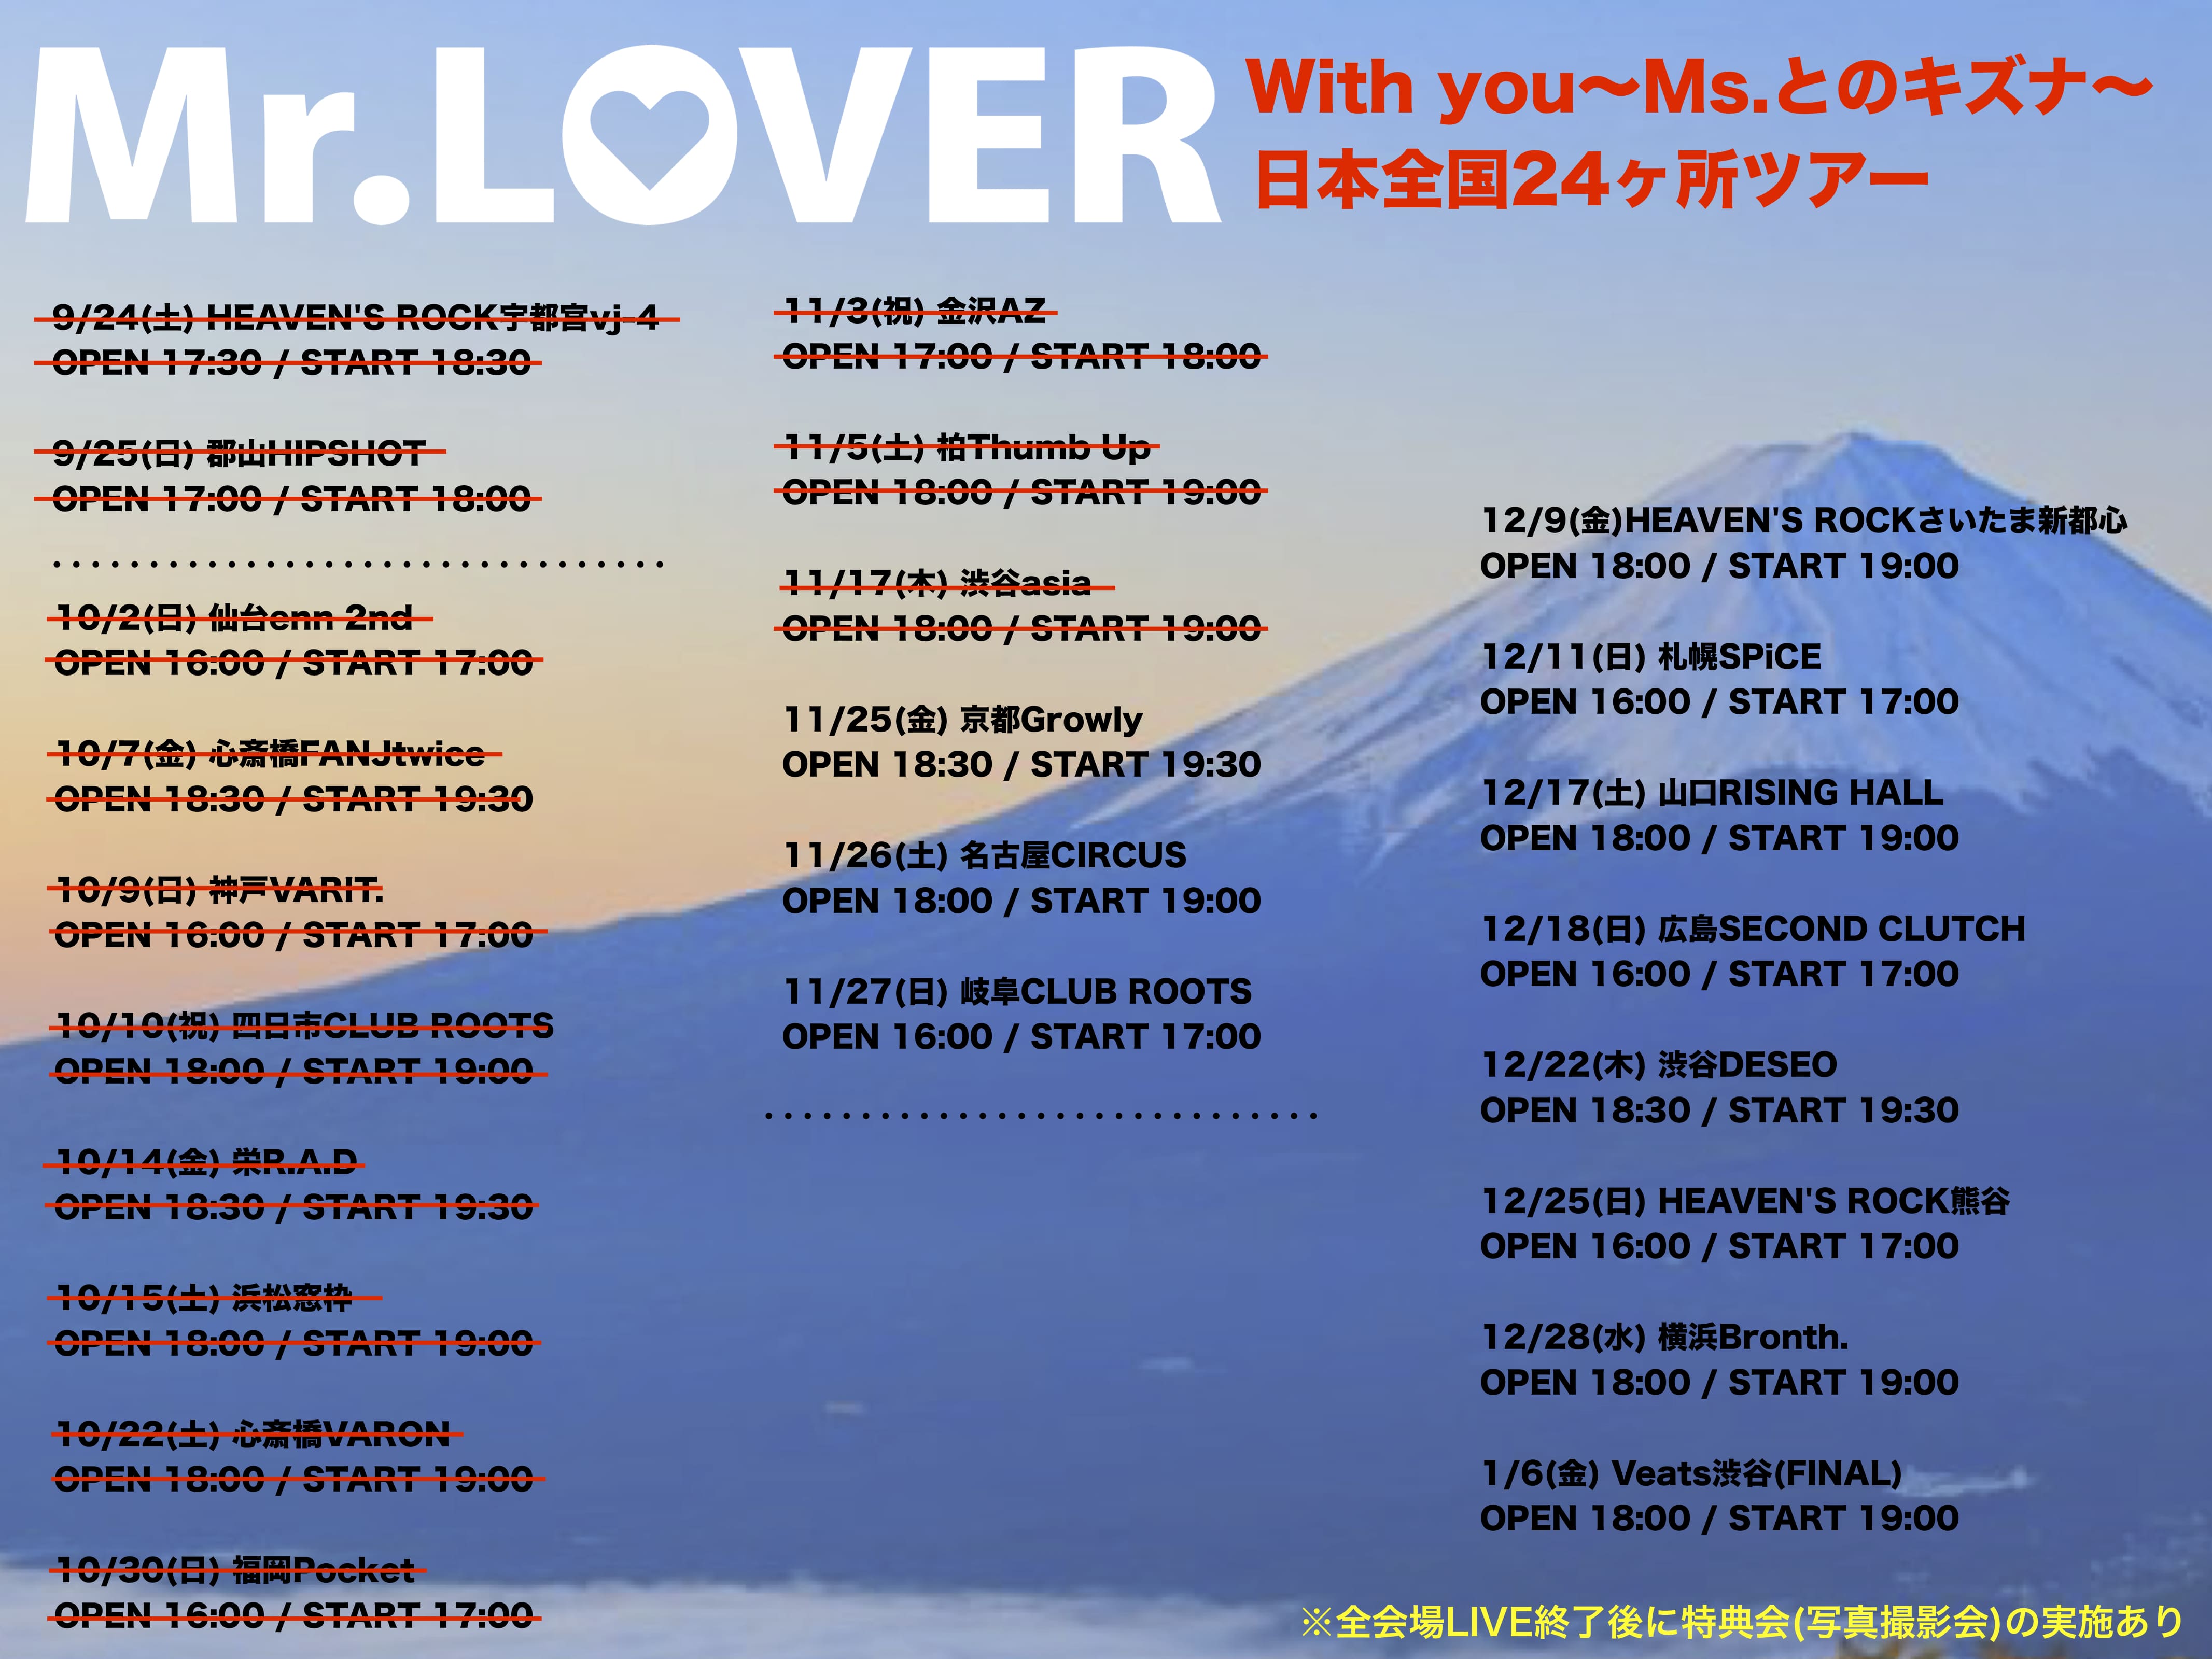 Mr.LOVER全国24ヶ所ツアー「With you〜Ms.とのキズナ」埼玉熊谷公演